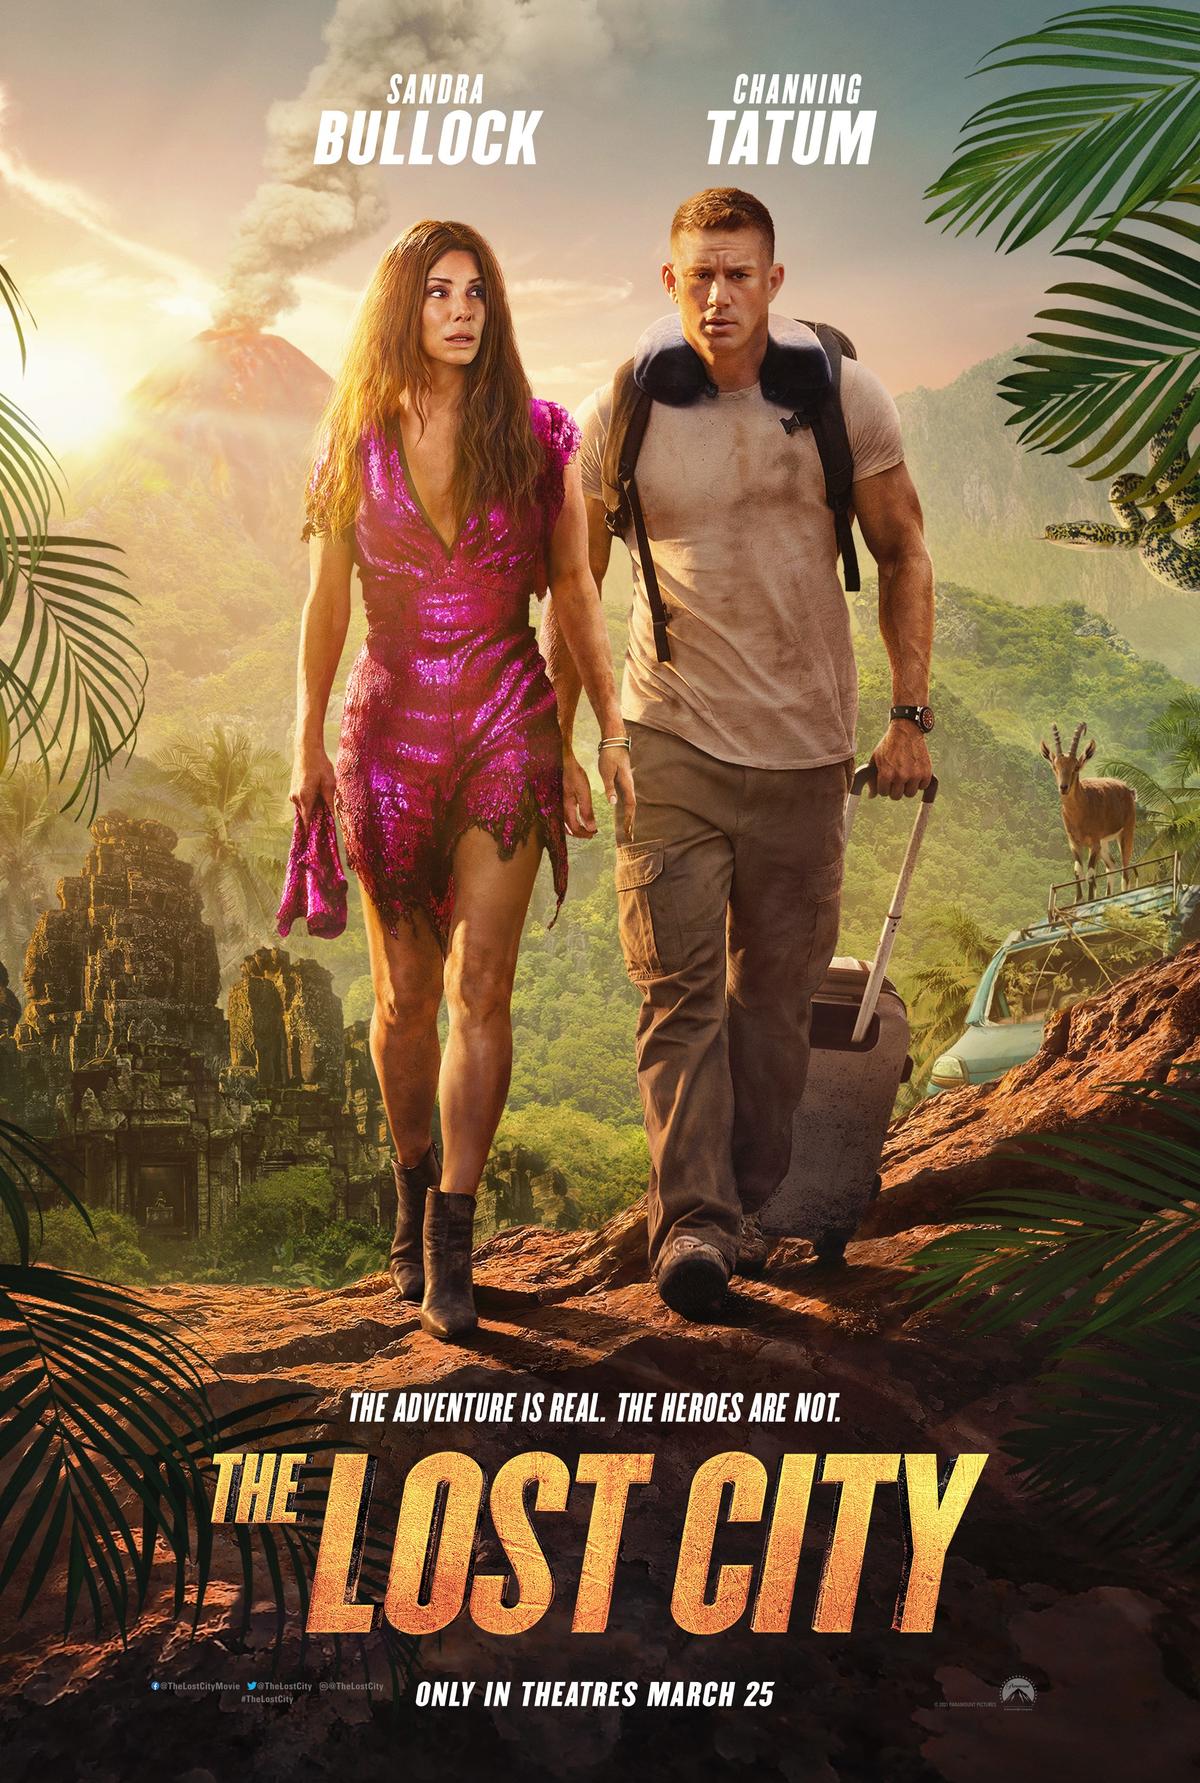 Movie poster for "The Lost City." (Paramount Pictures)